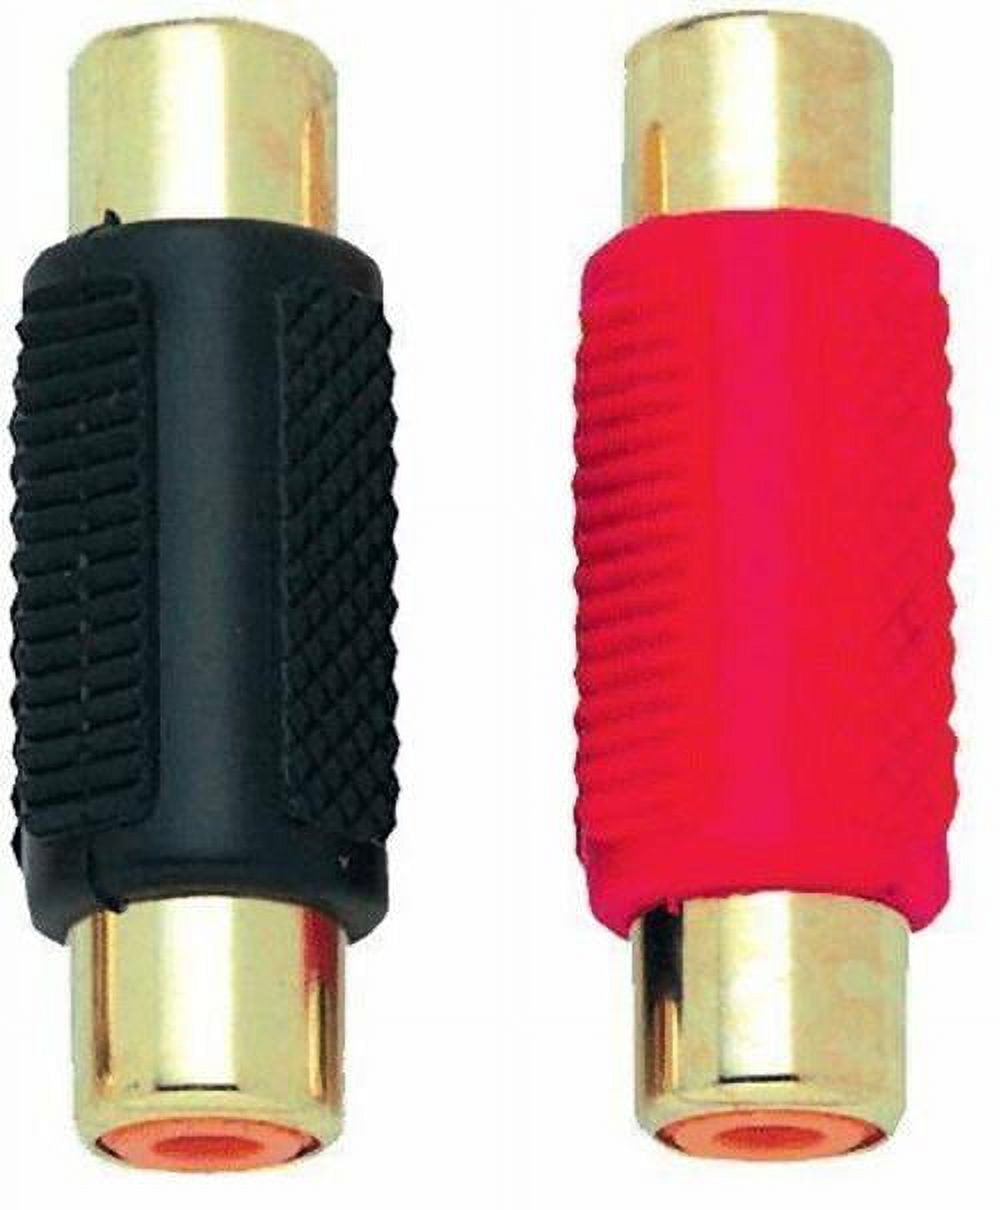 Absolute FF100-20 20 Pack Audio Video Gold RCA Female to Female Coupler Adapter